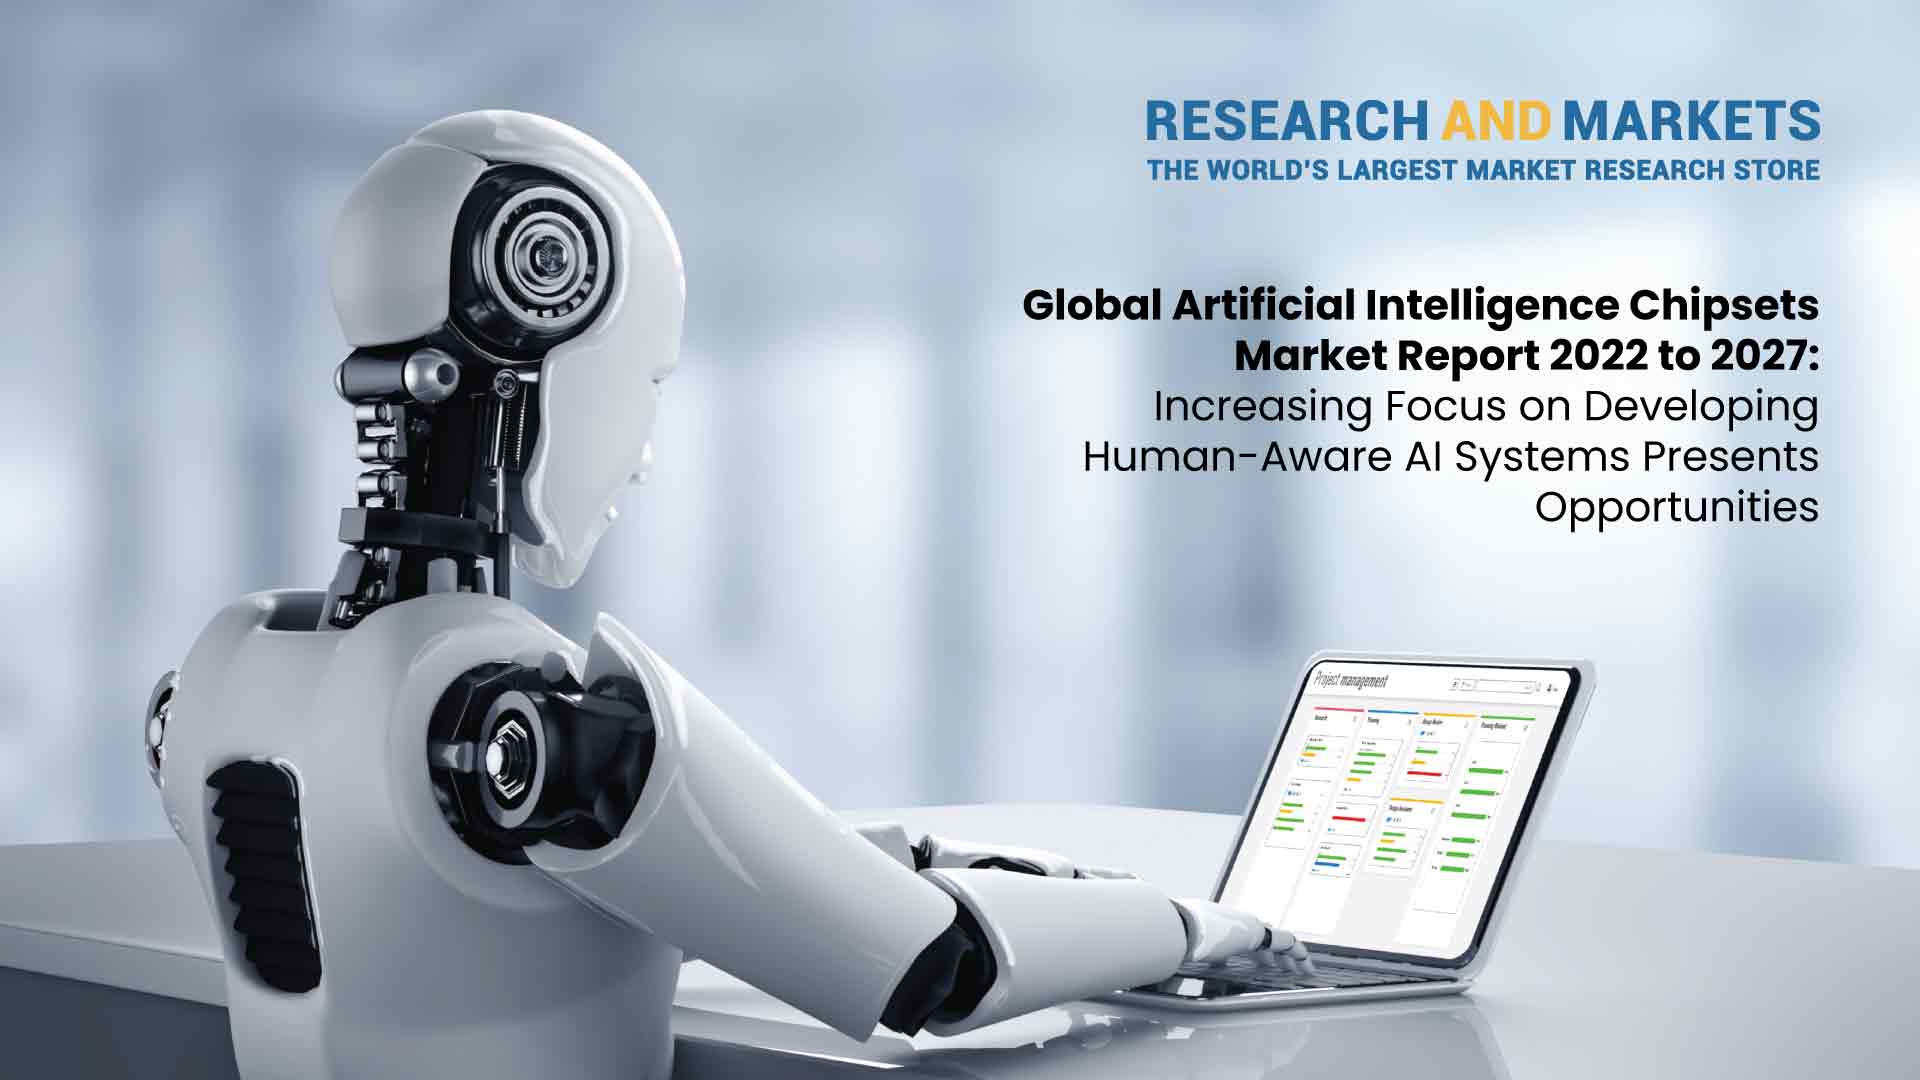 MarTech Edge - GlobeNewswire Release: Global Artificial Intelligence Chipsets Market Report 2022 to 2027: Increasing Focus on Developing Human-Aware AI Systems Presents Opportunities